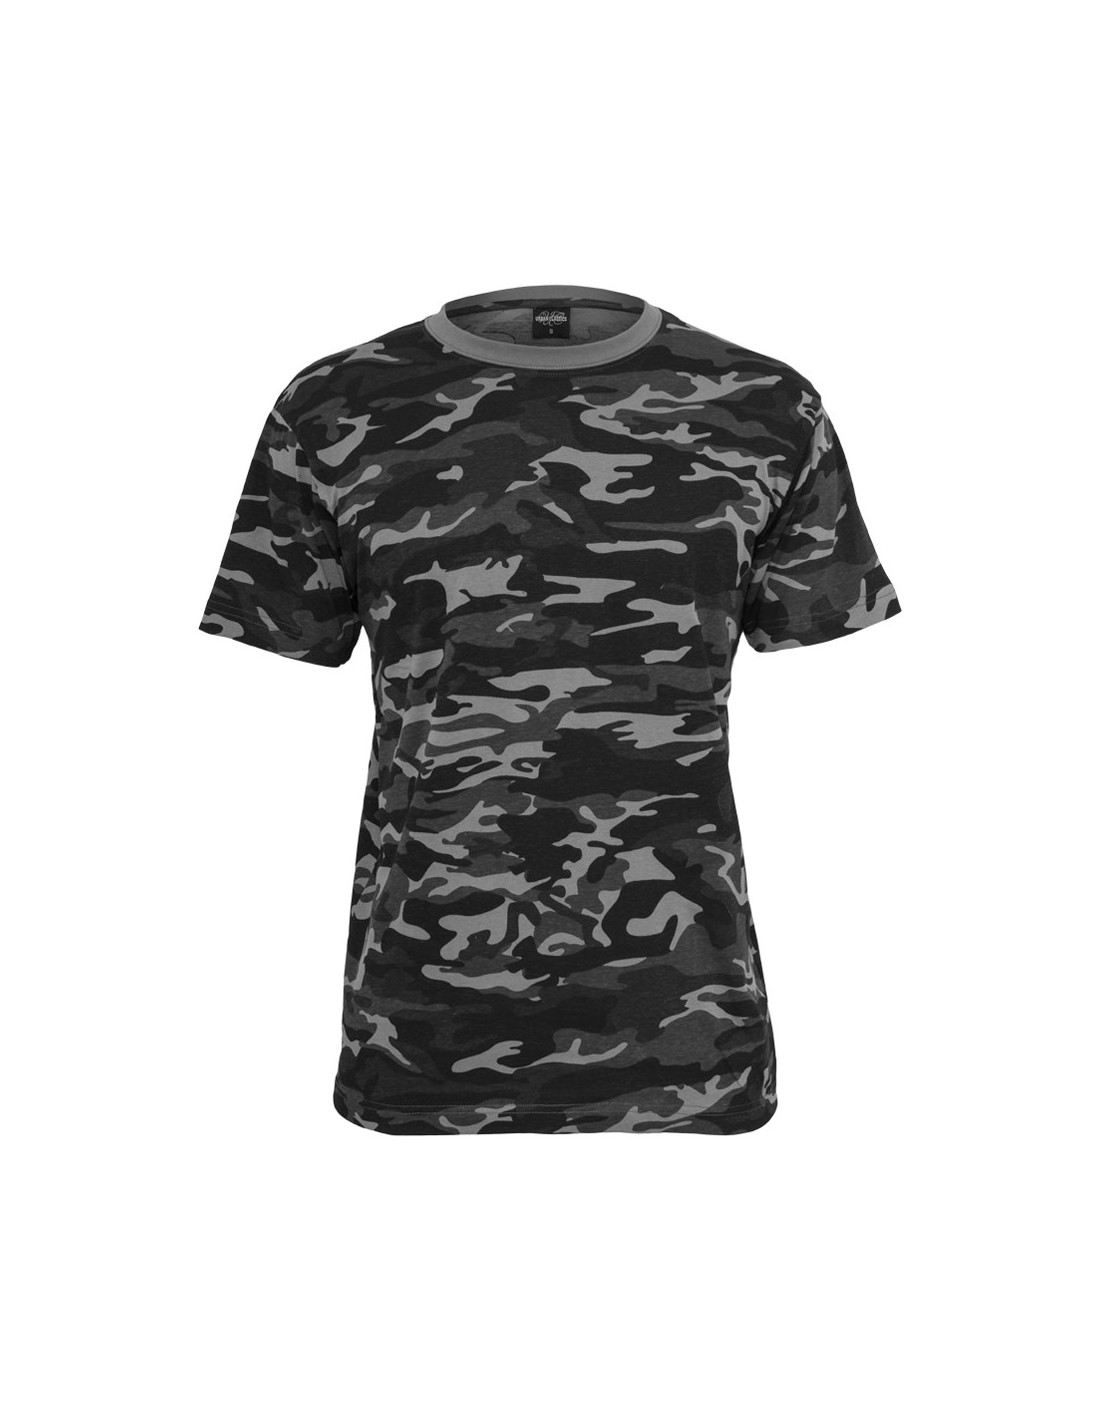 Urban Camo Tee - TB494-00378 - Fitted T-shirts